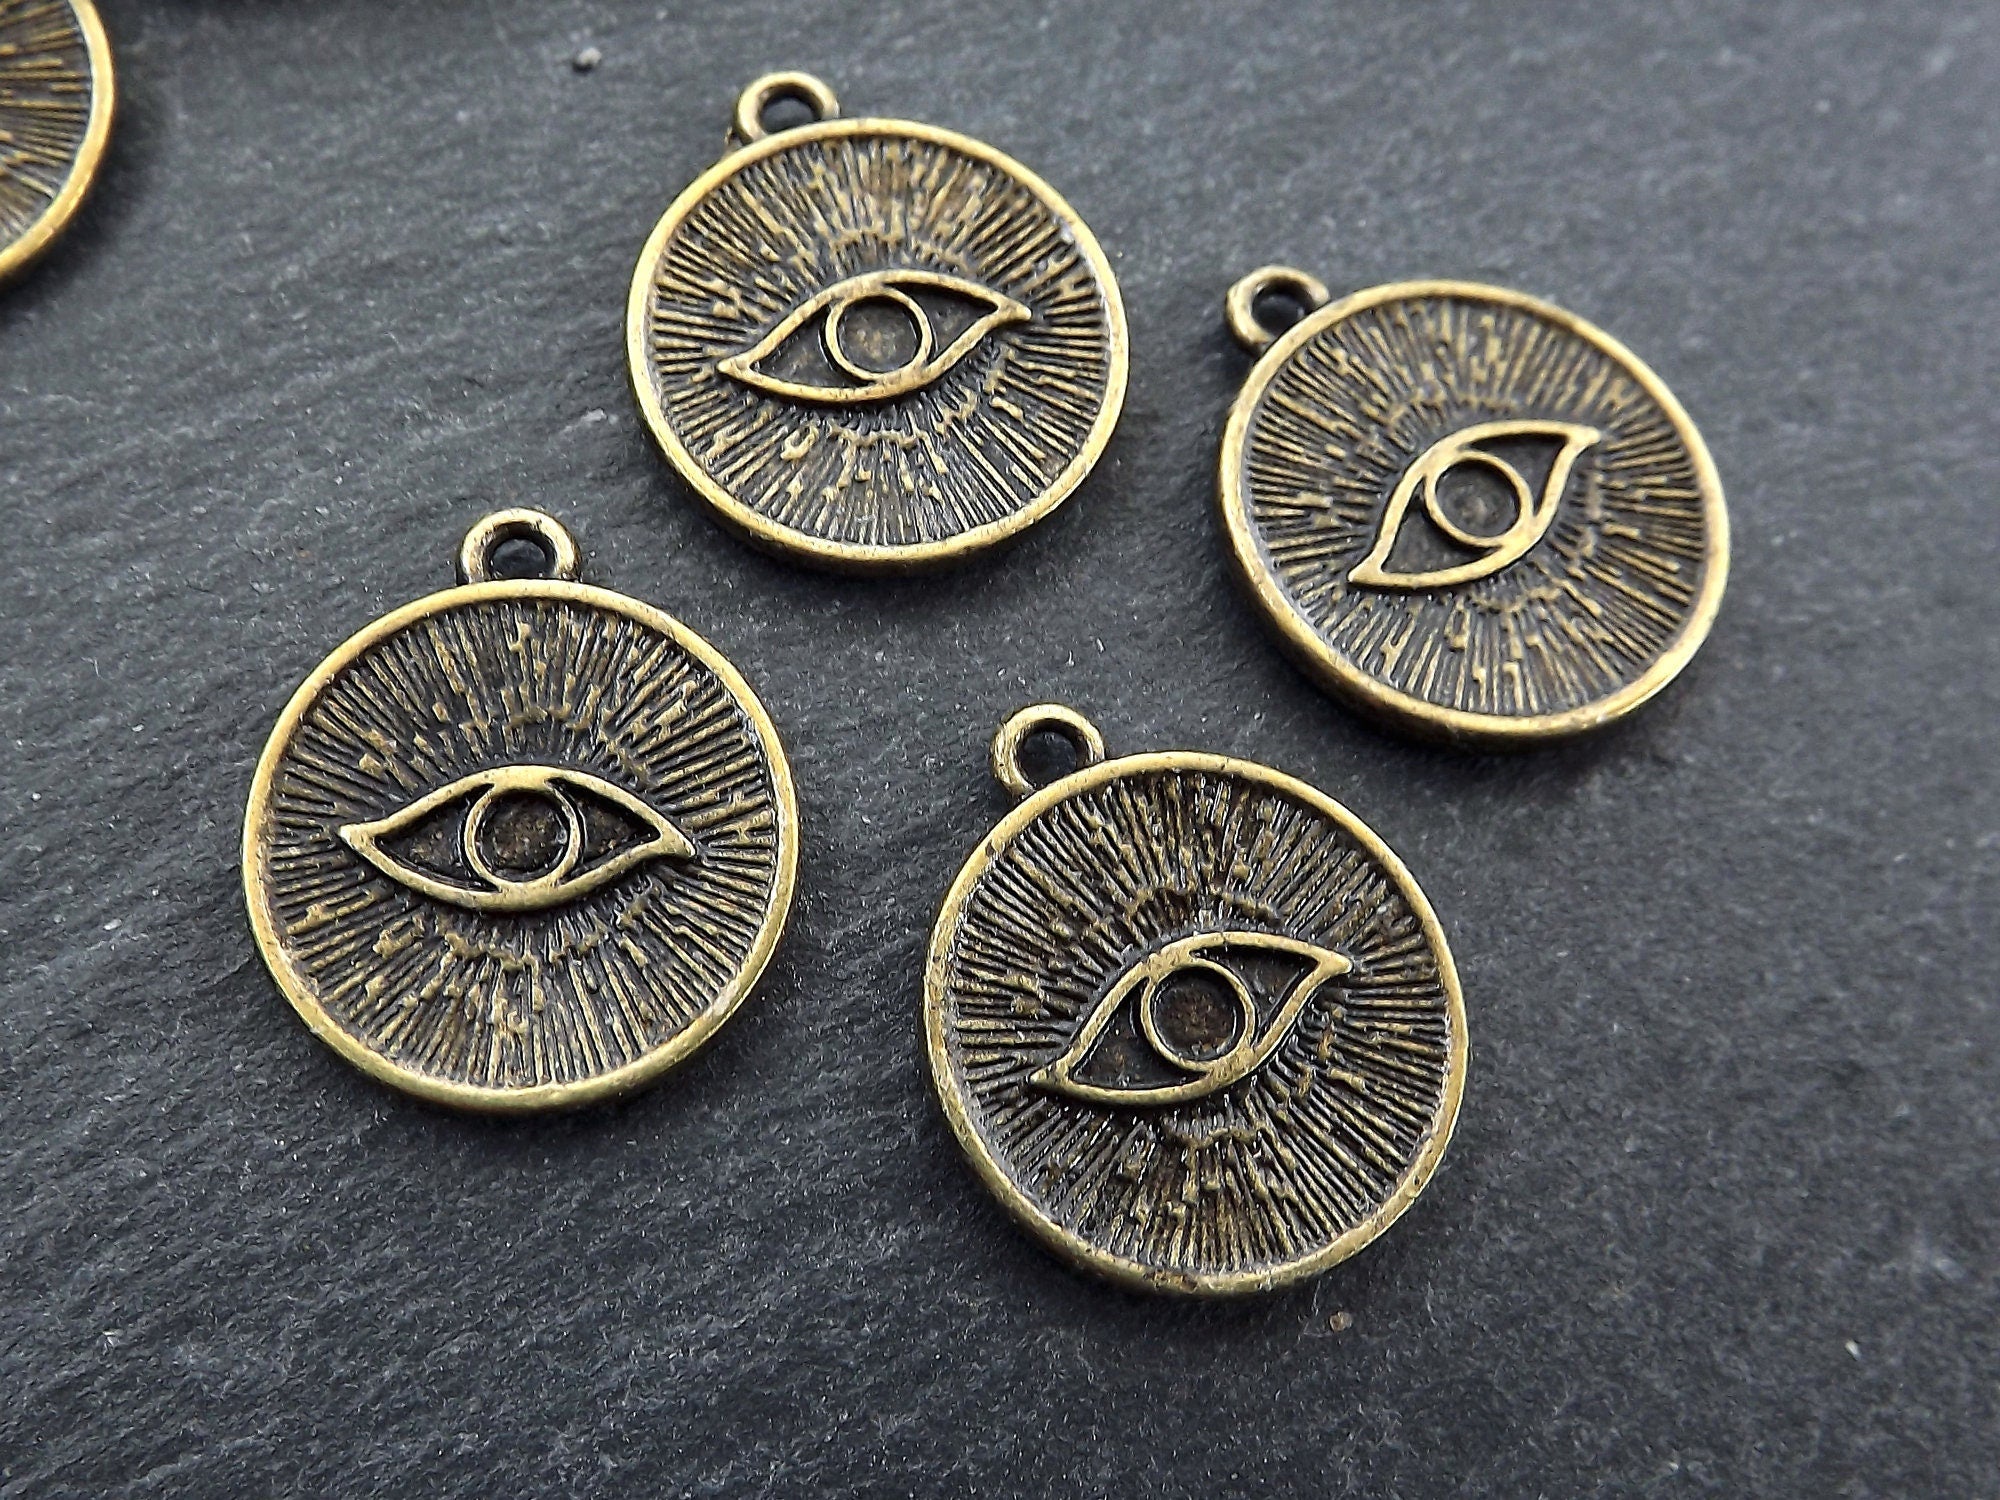 Evil Eye Pendant Charms, Engraved Evil Eye, Eye Of The Beholder, Good Luck, Protective Amulet Talisman, Antique Bronze Plated 4pc